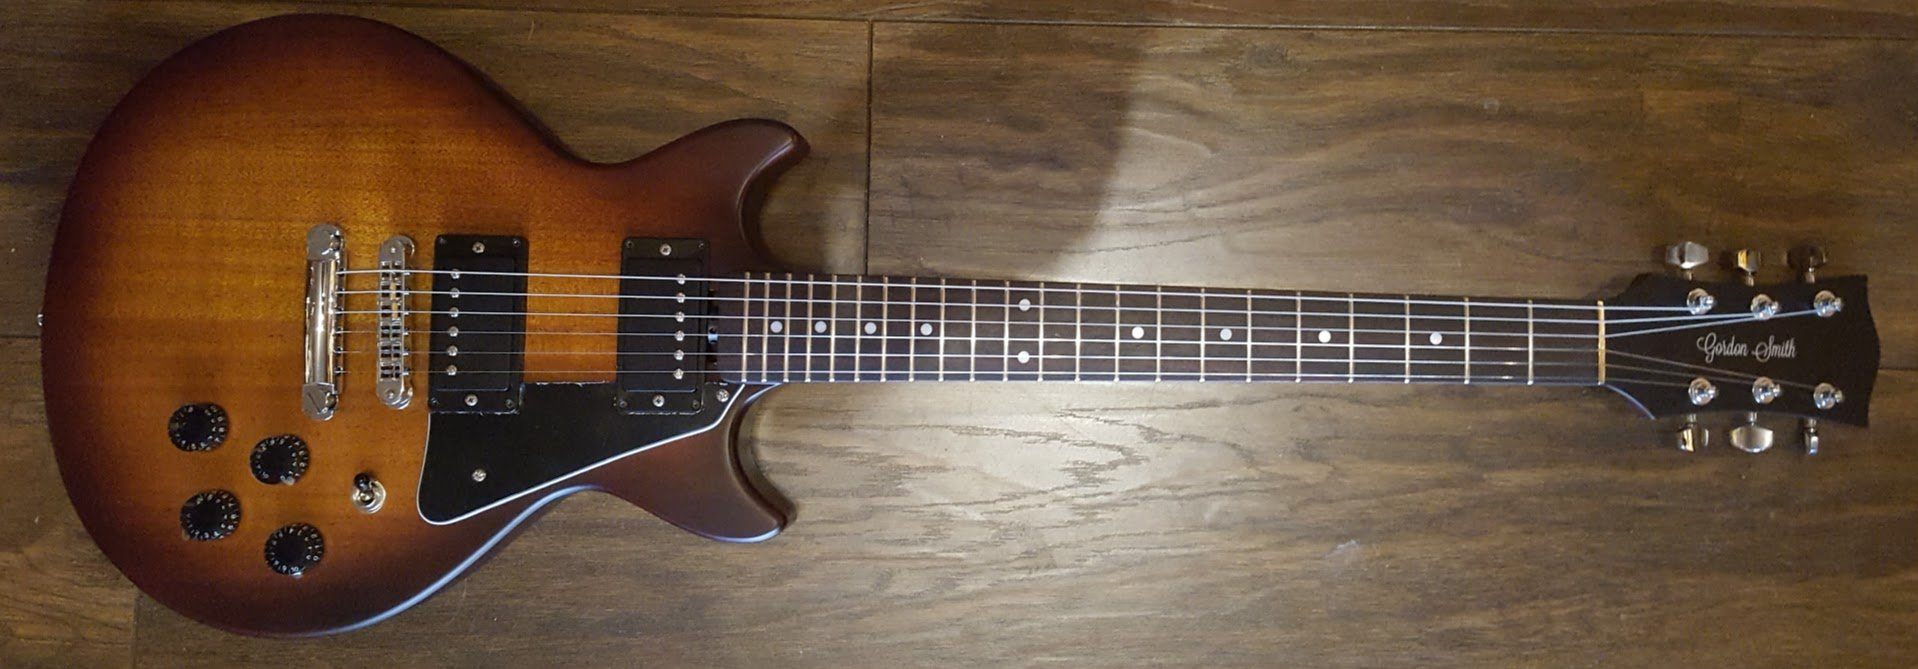 Gordon Smith GS2 HB Heritage Thick Body Full Mahogany, Electric Guitar for sale at Richards Guitars.